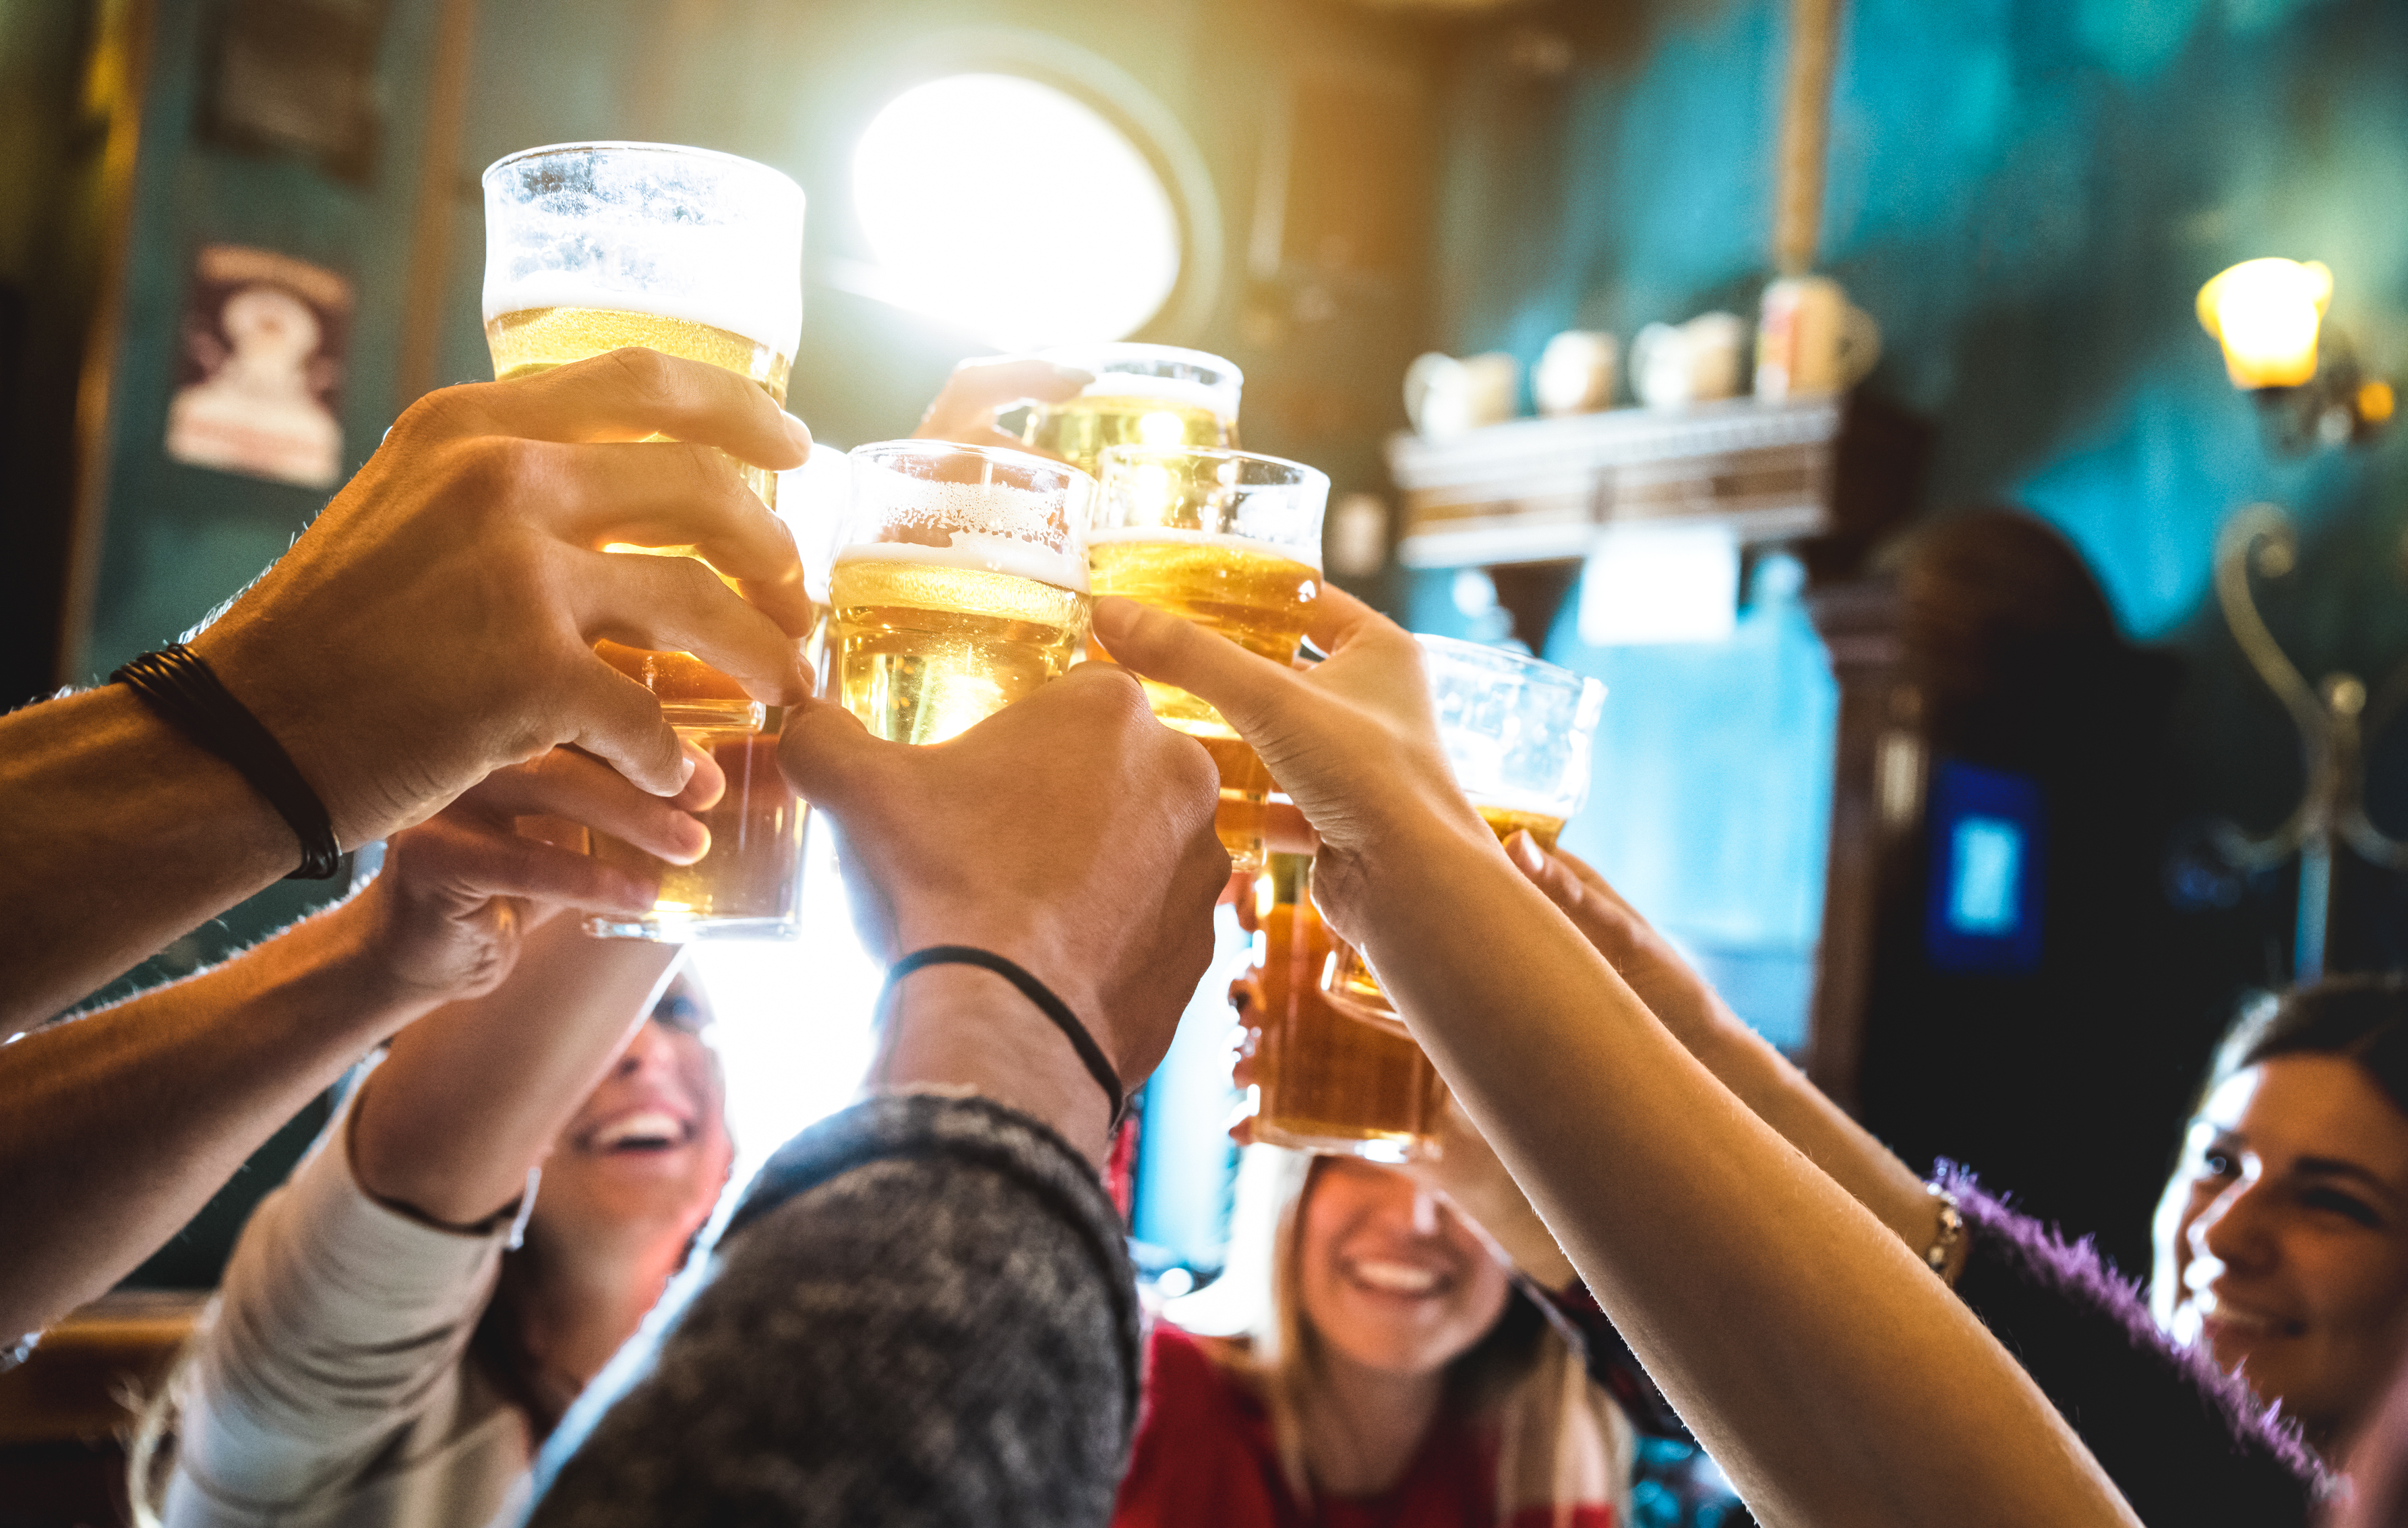 Are You More of a Baby Boomer or a Millennial? Group of happy friends drinking and toasting beer at brewery bar restaurant   Friendship concept with young people having fun together at cool vintage pub   Focus on middle pint glass   High iso image